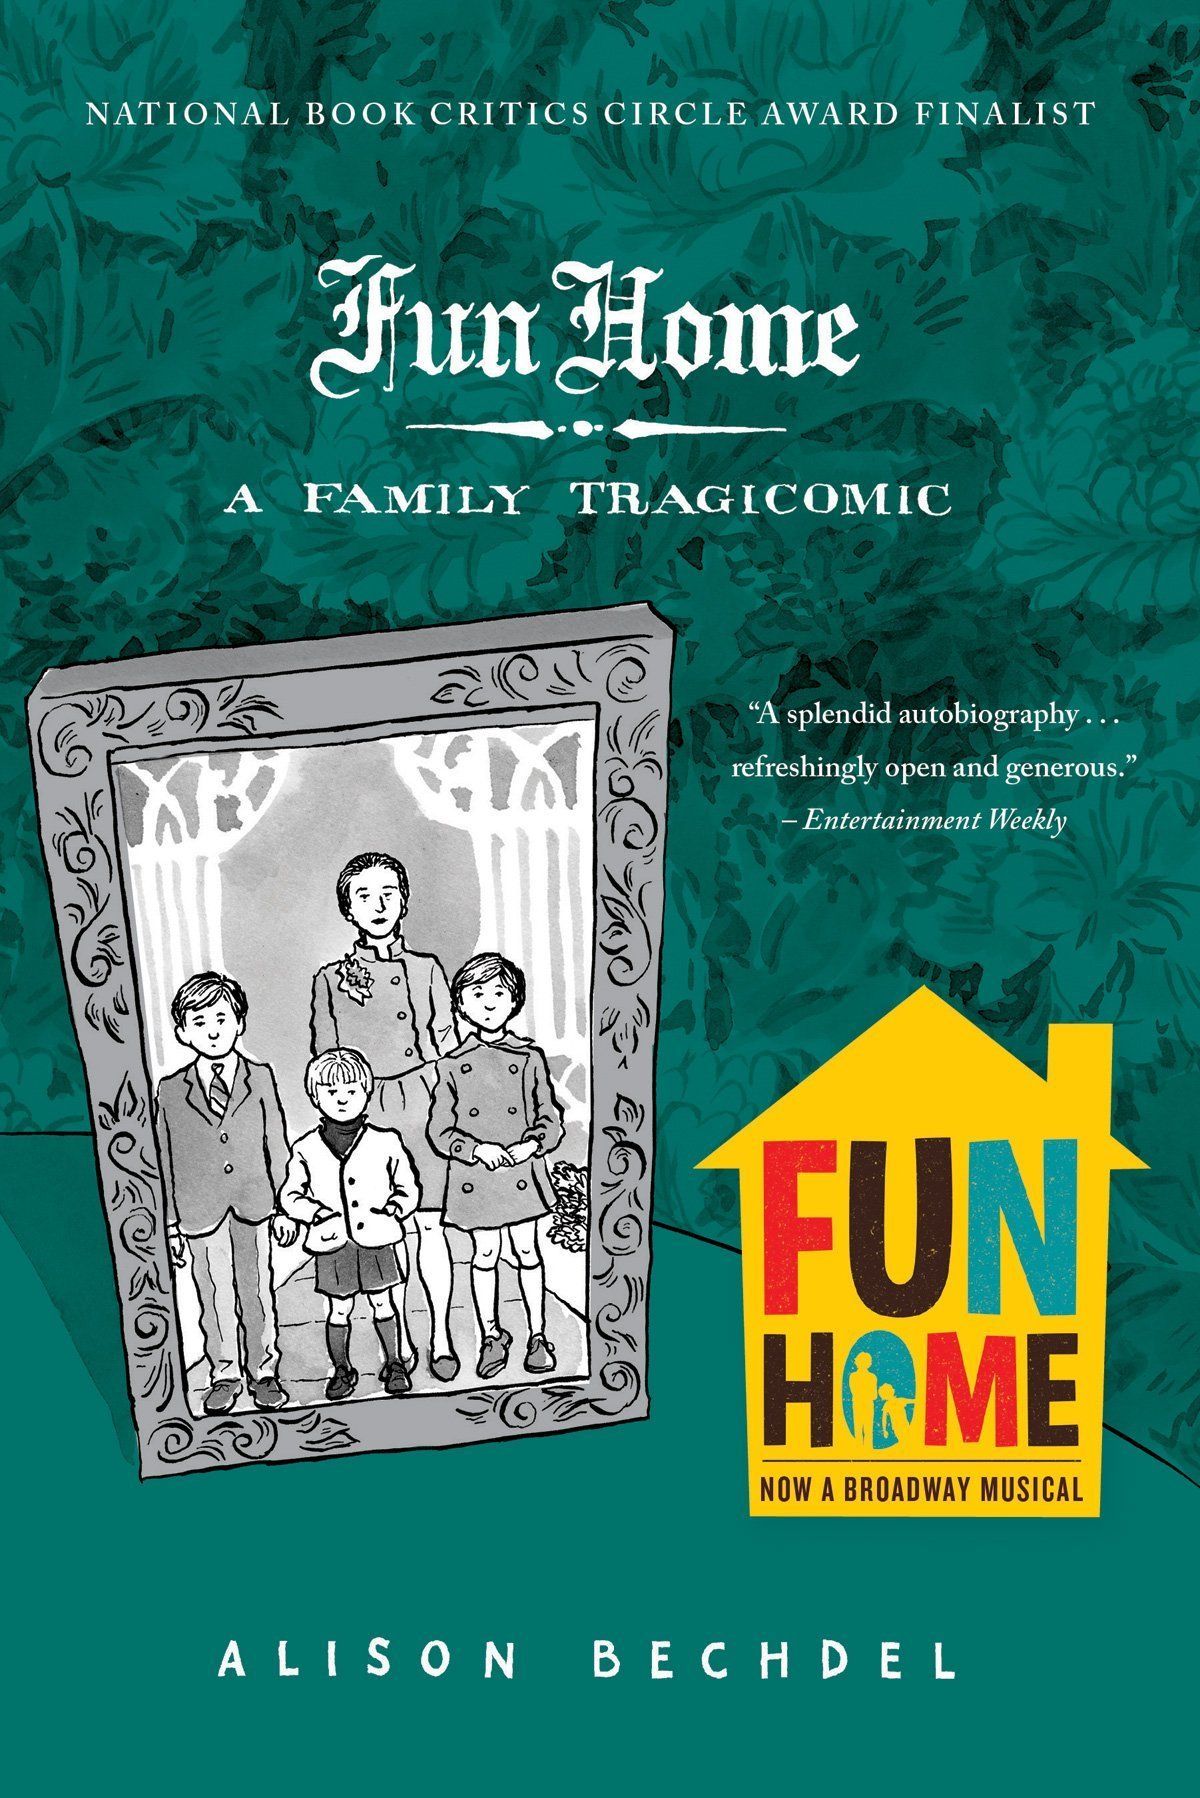 Fun Home by Allison Bechdel book cover